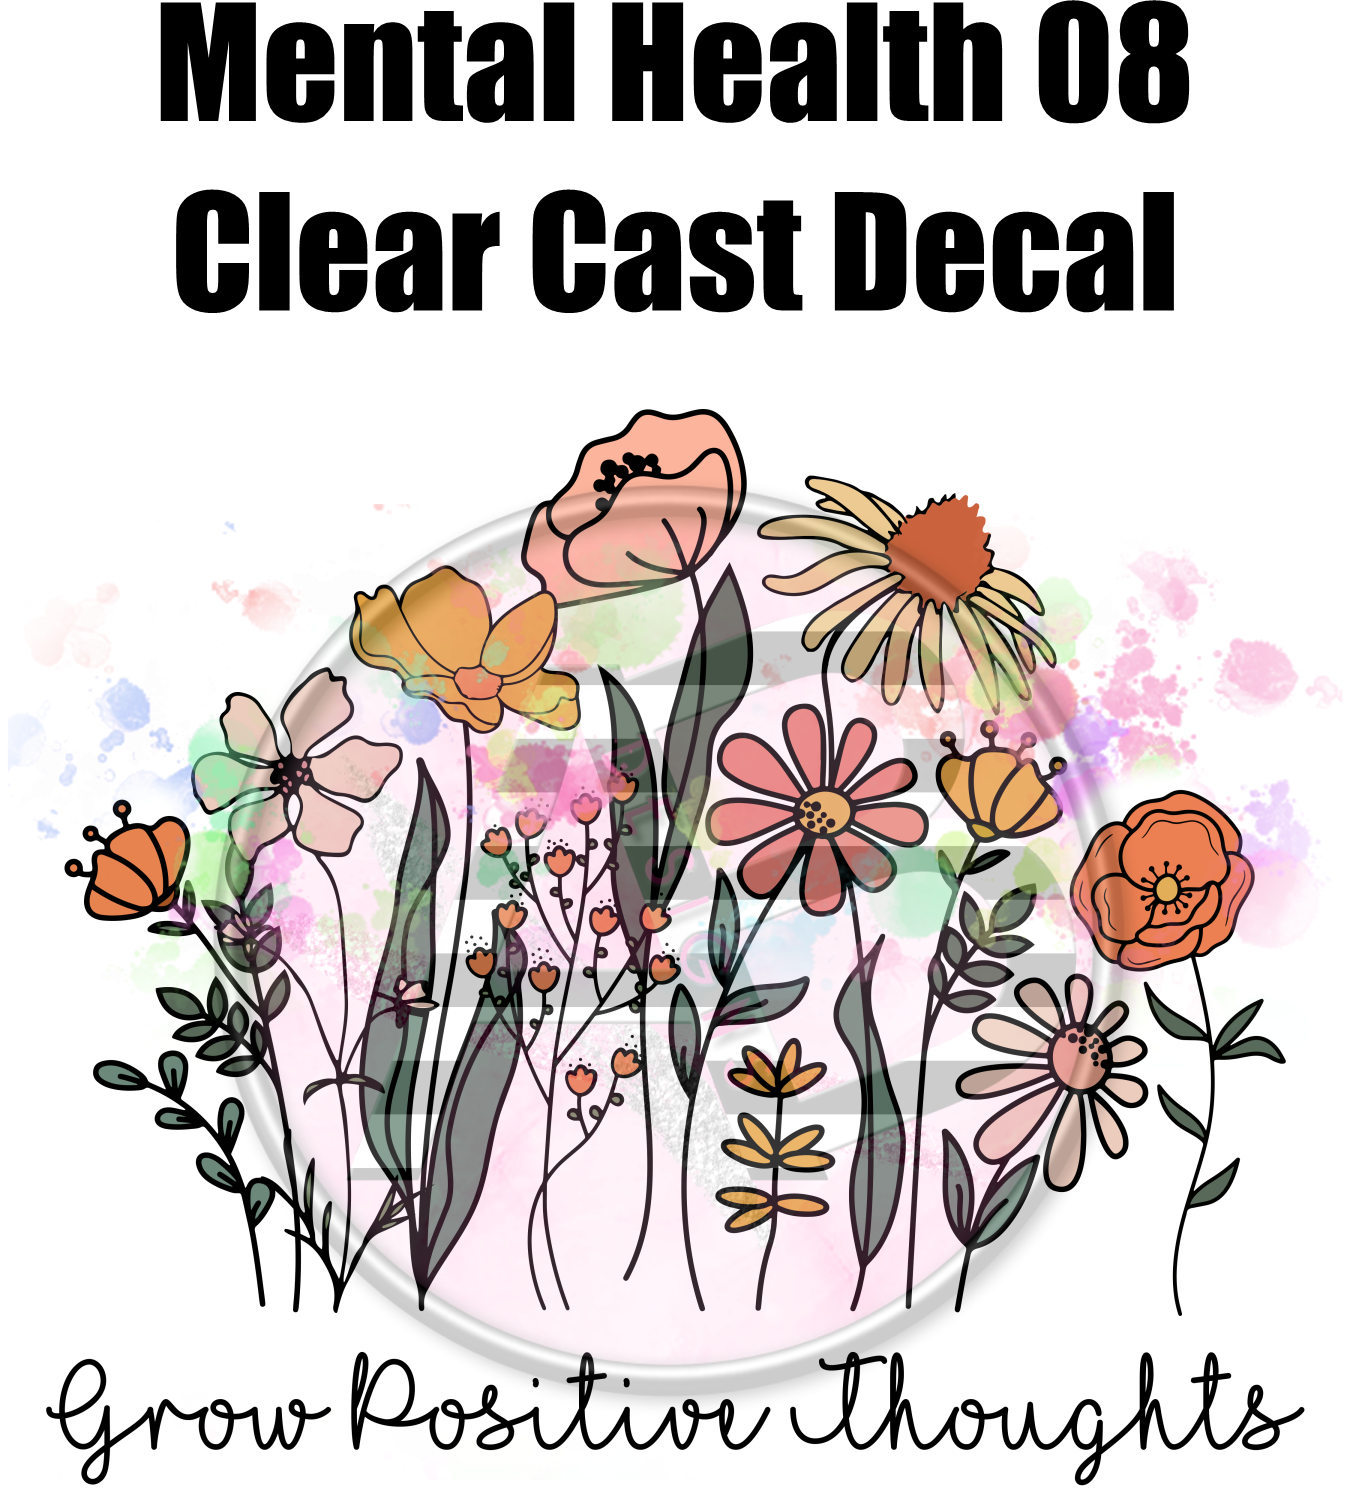 Mental Health 08 - Clear Cast Decal